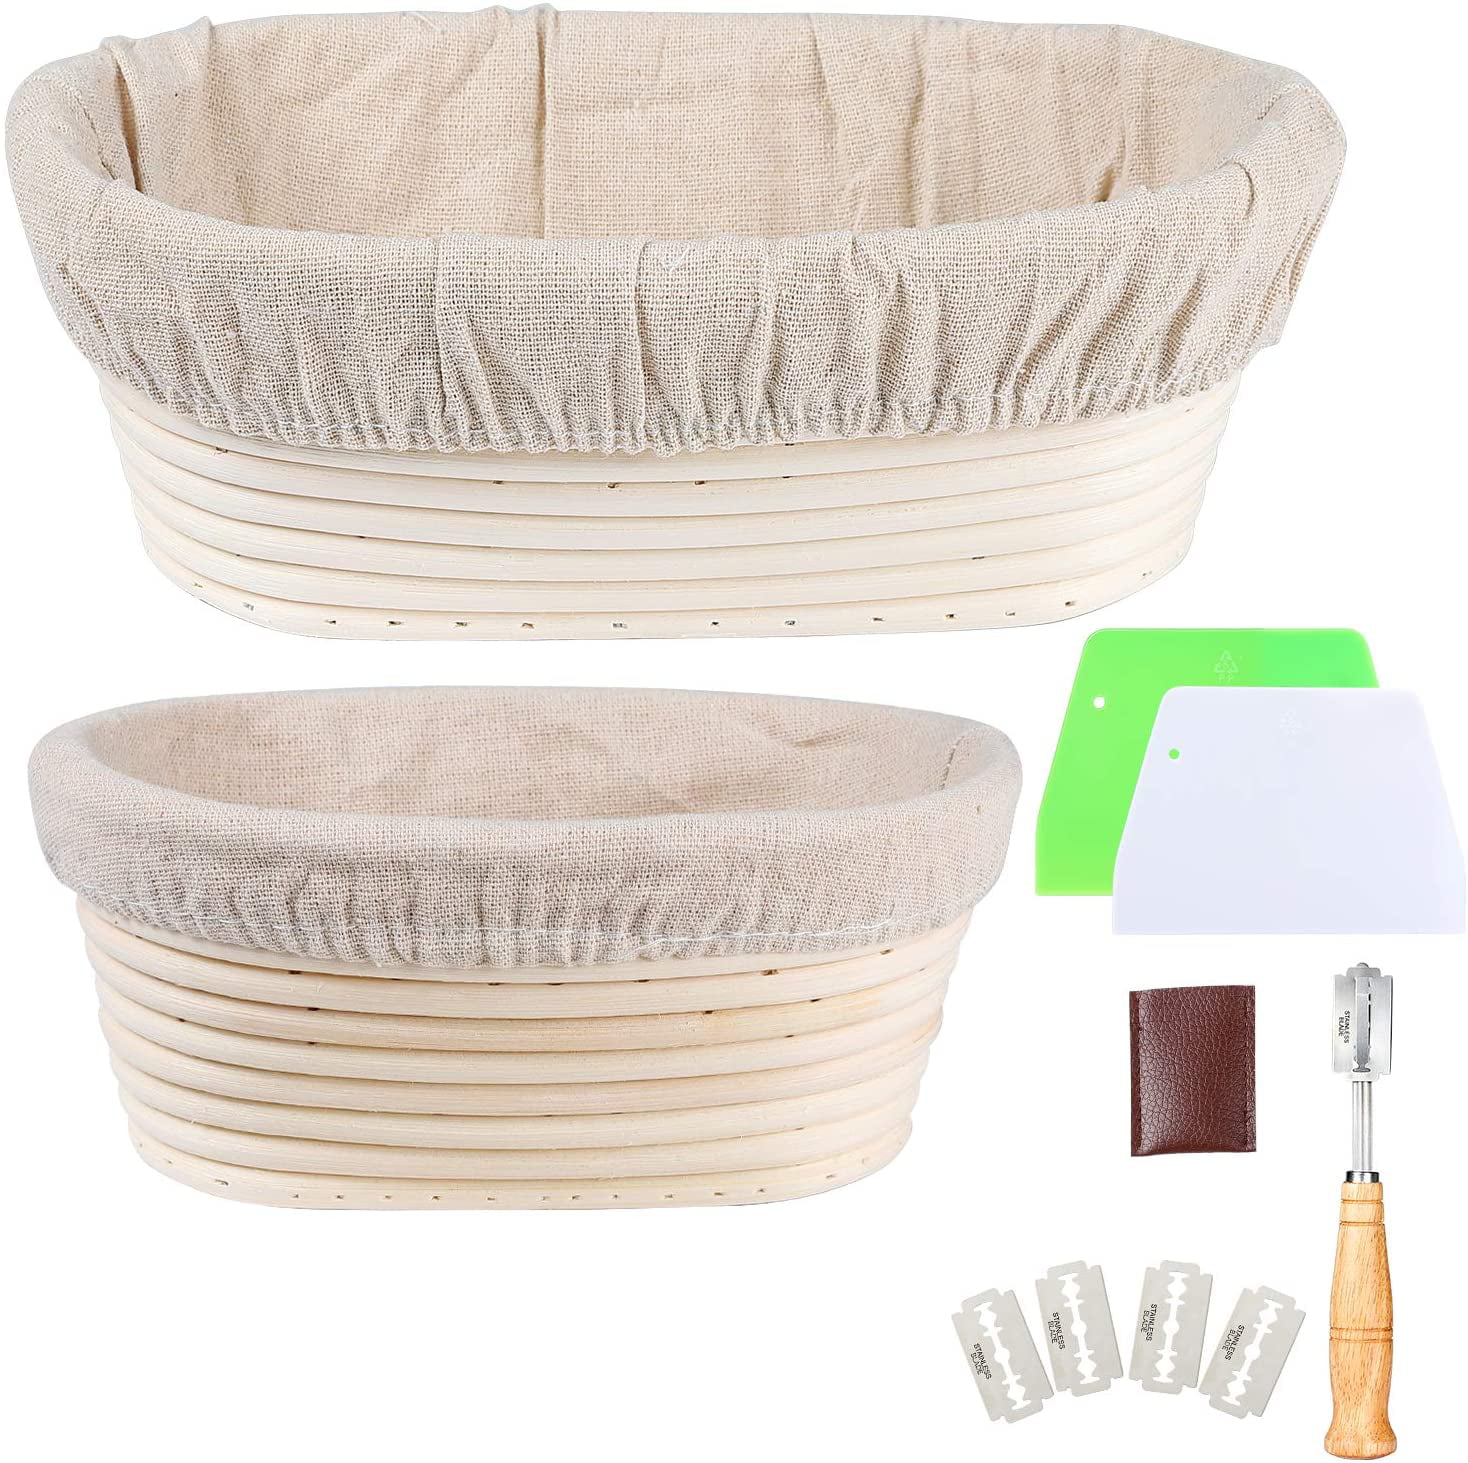 Wicker Cane Oval, for 1.5 & 2.2 lb of Sourdough Banneton Bread Proofing Basket Set of 2 Stainl Scraper Steel-Clamped w/Covering Natural Fermentation Baskets